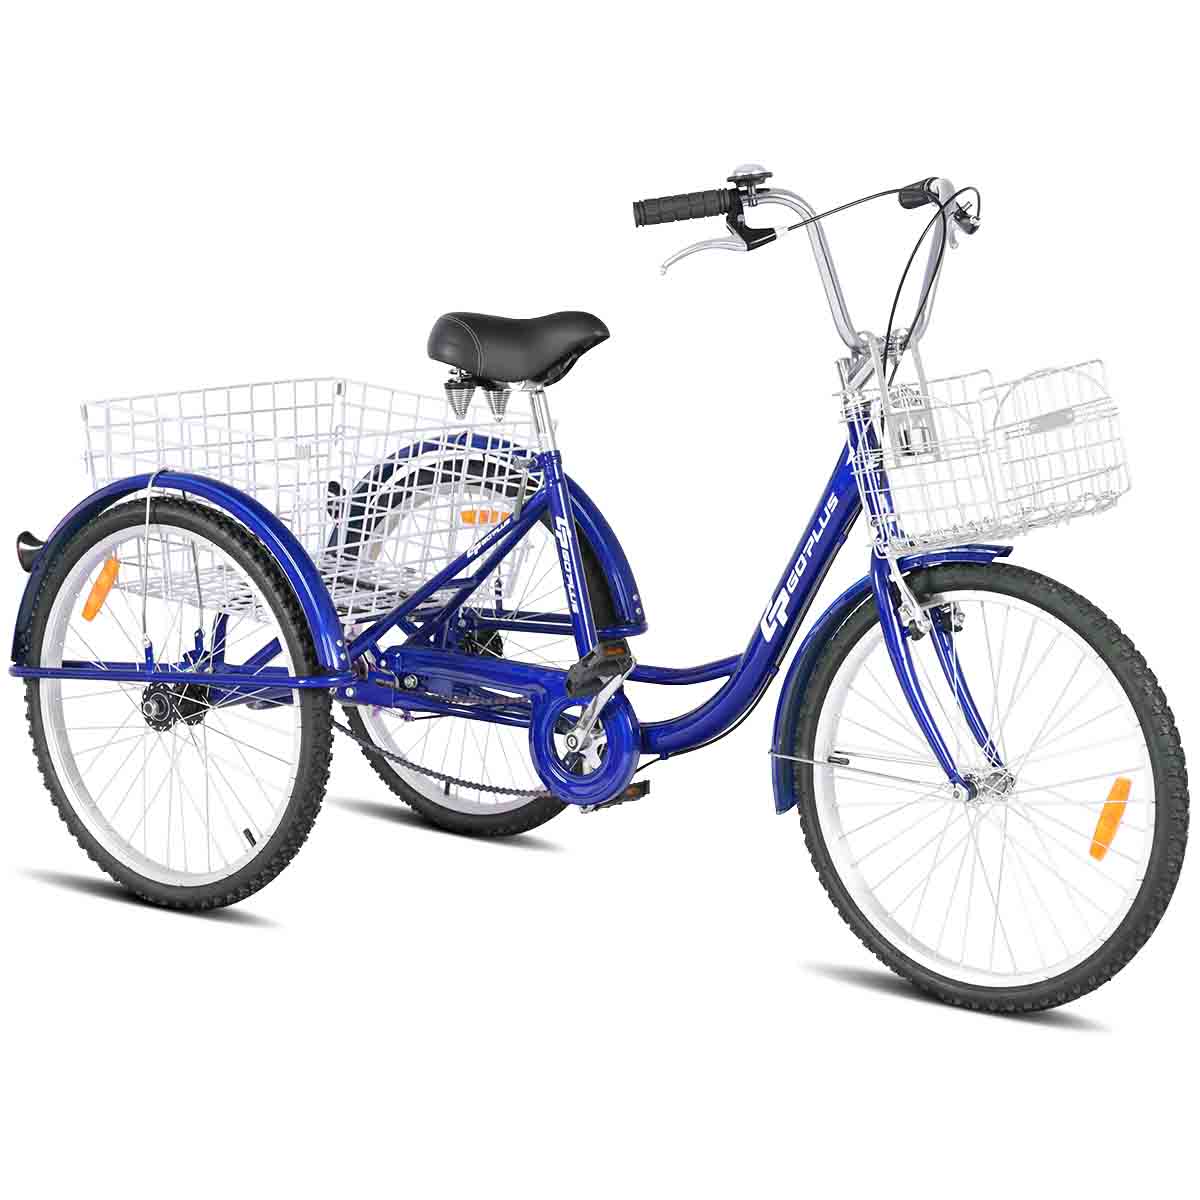 Goplus Adult Tricycle Trike Cruise Bike Three-Wheeled Bicycle with Large Size Basket for Recreation